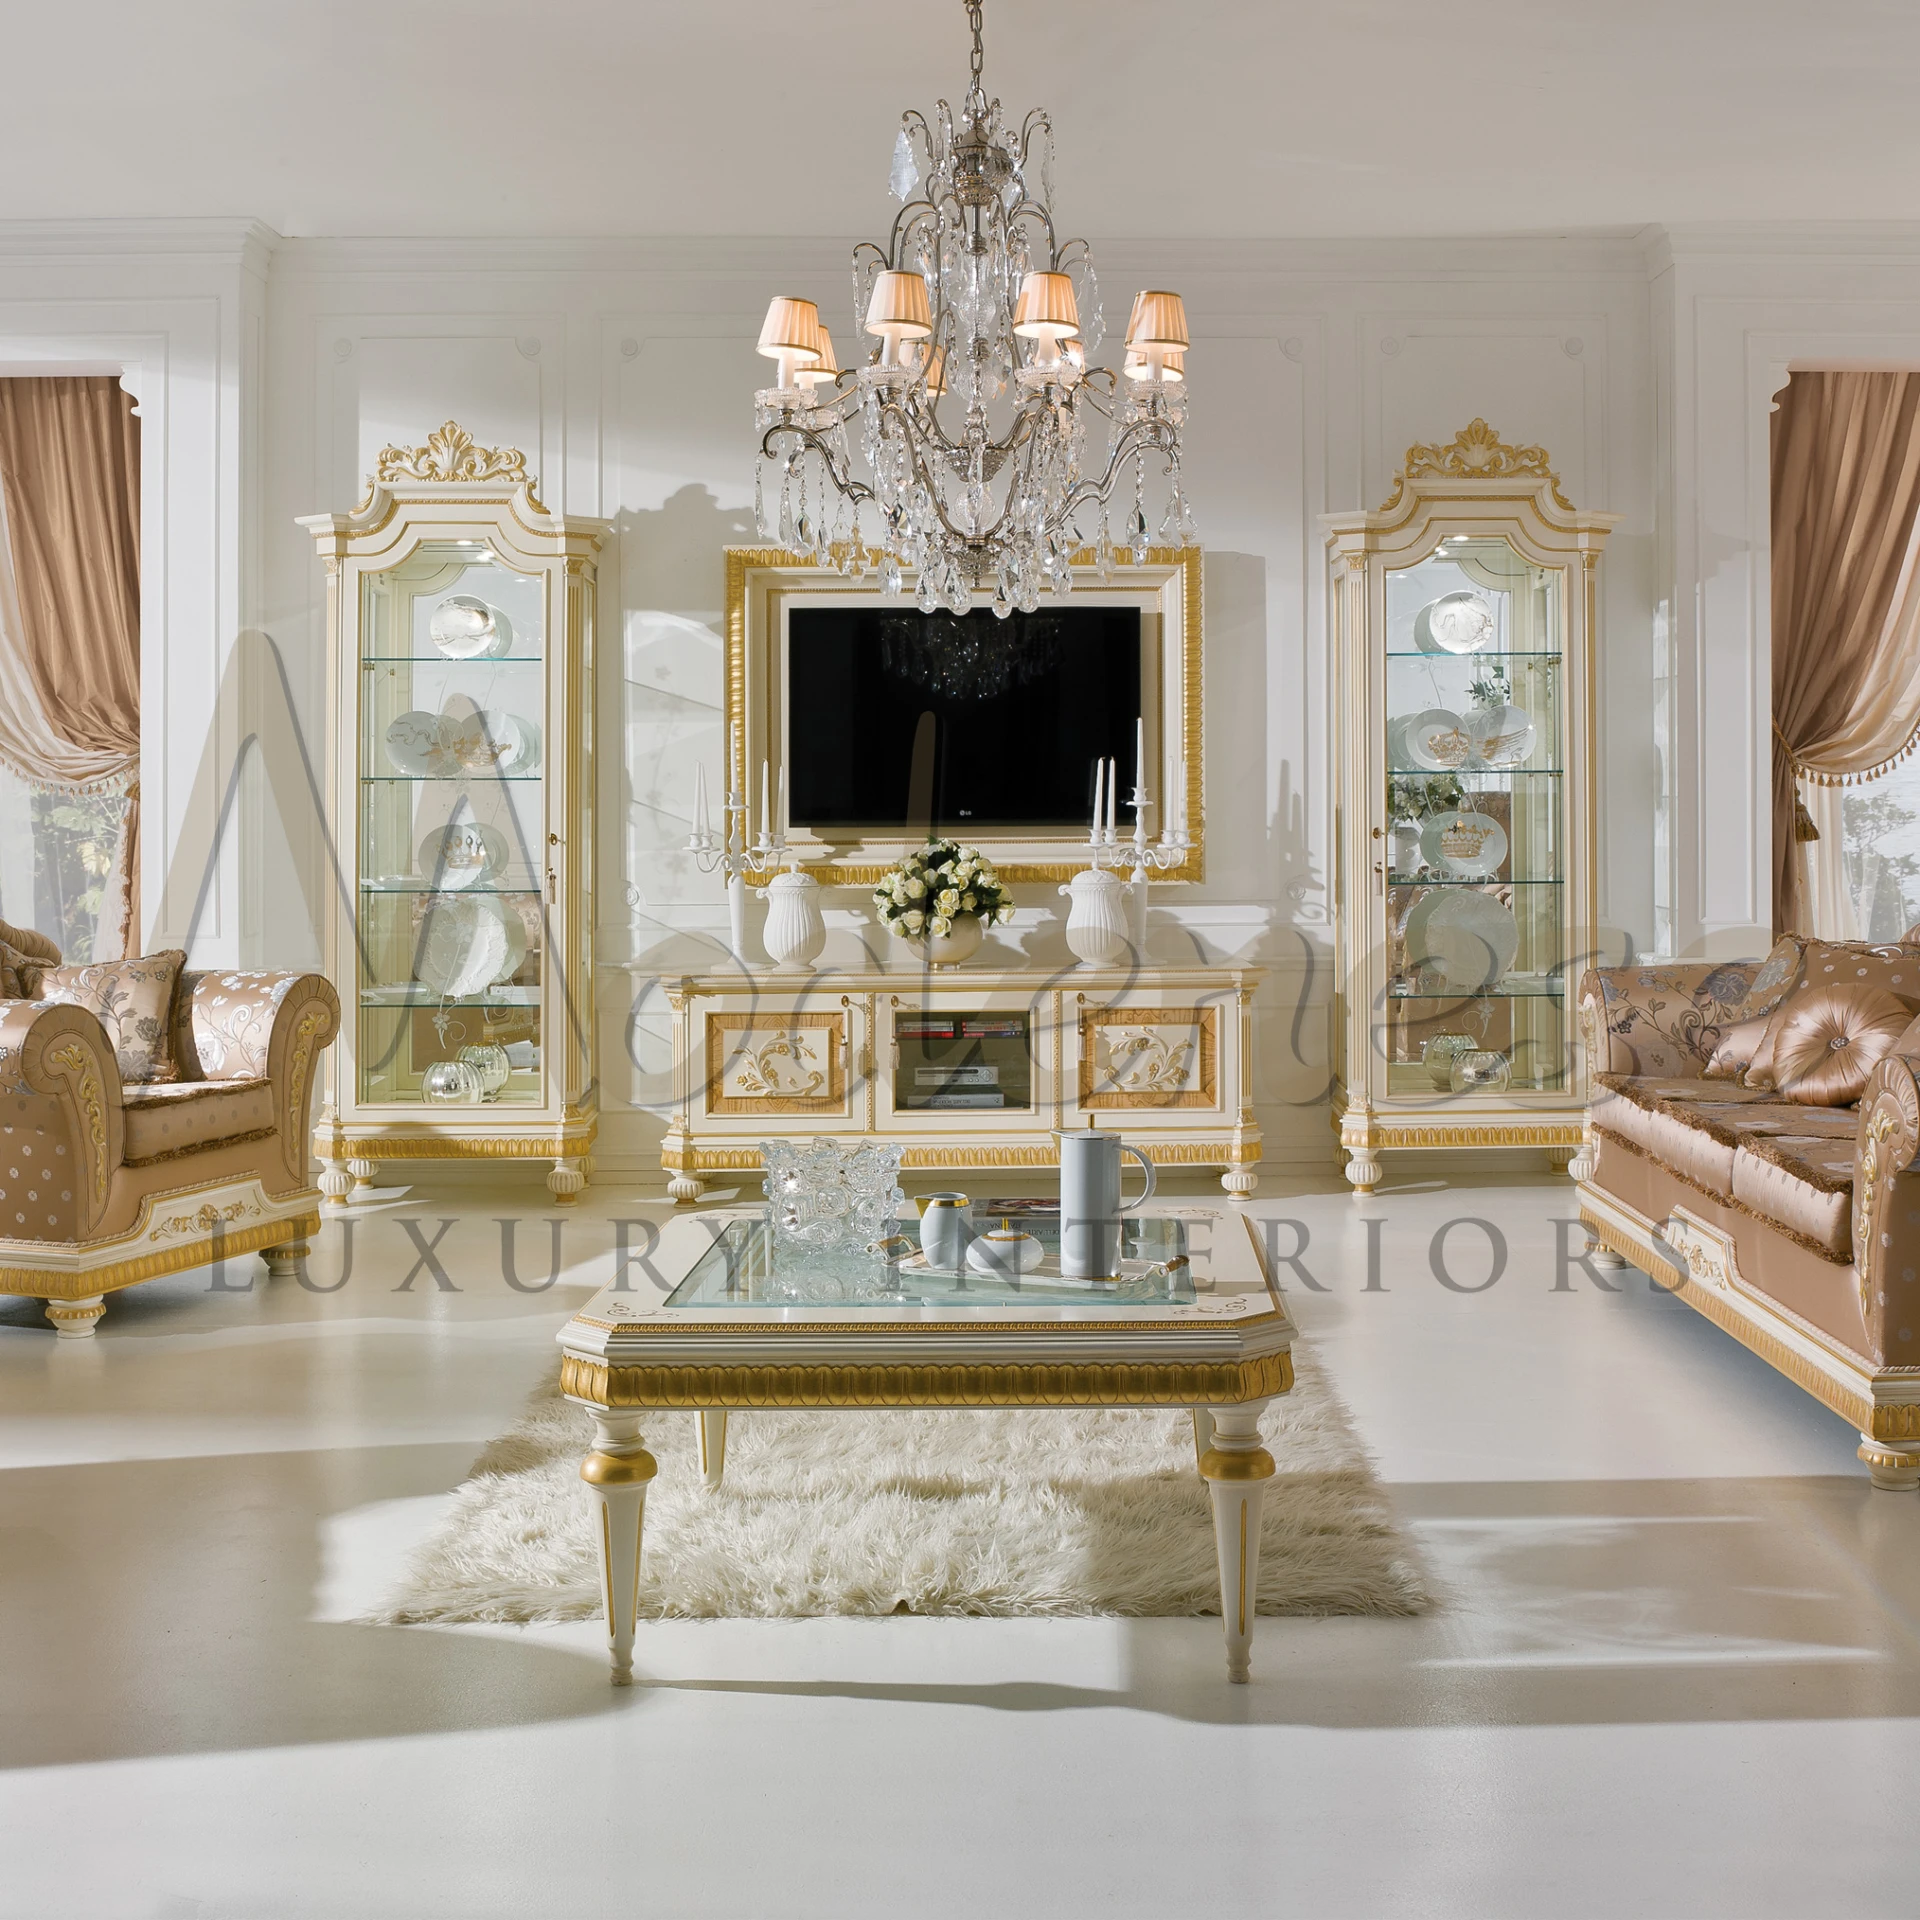 A lavish room that shows off fancy furniture with gold details and nice decorations